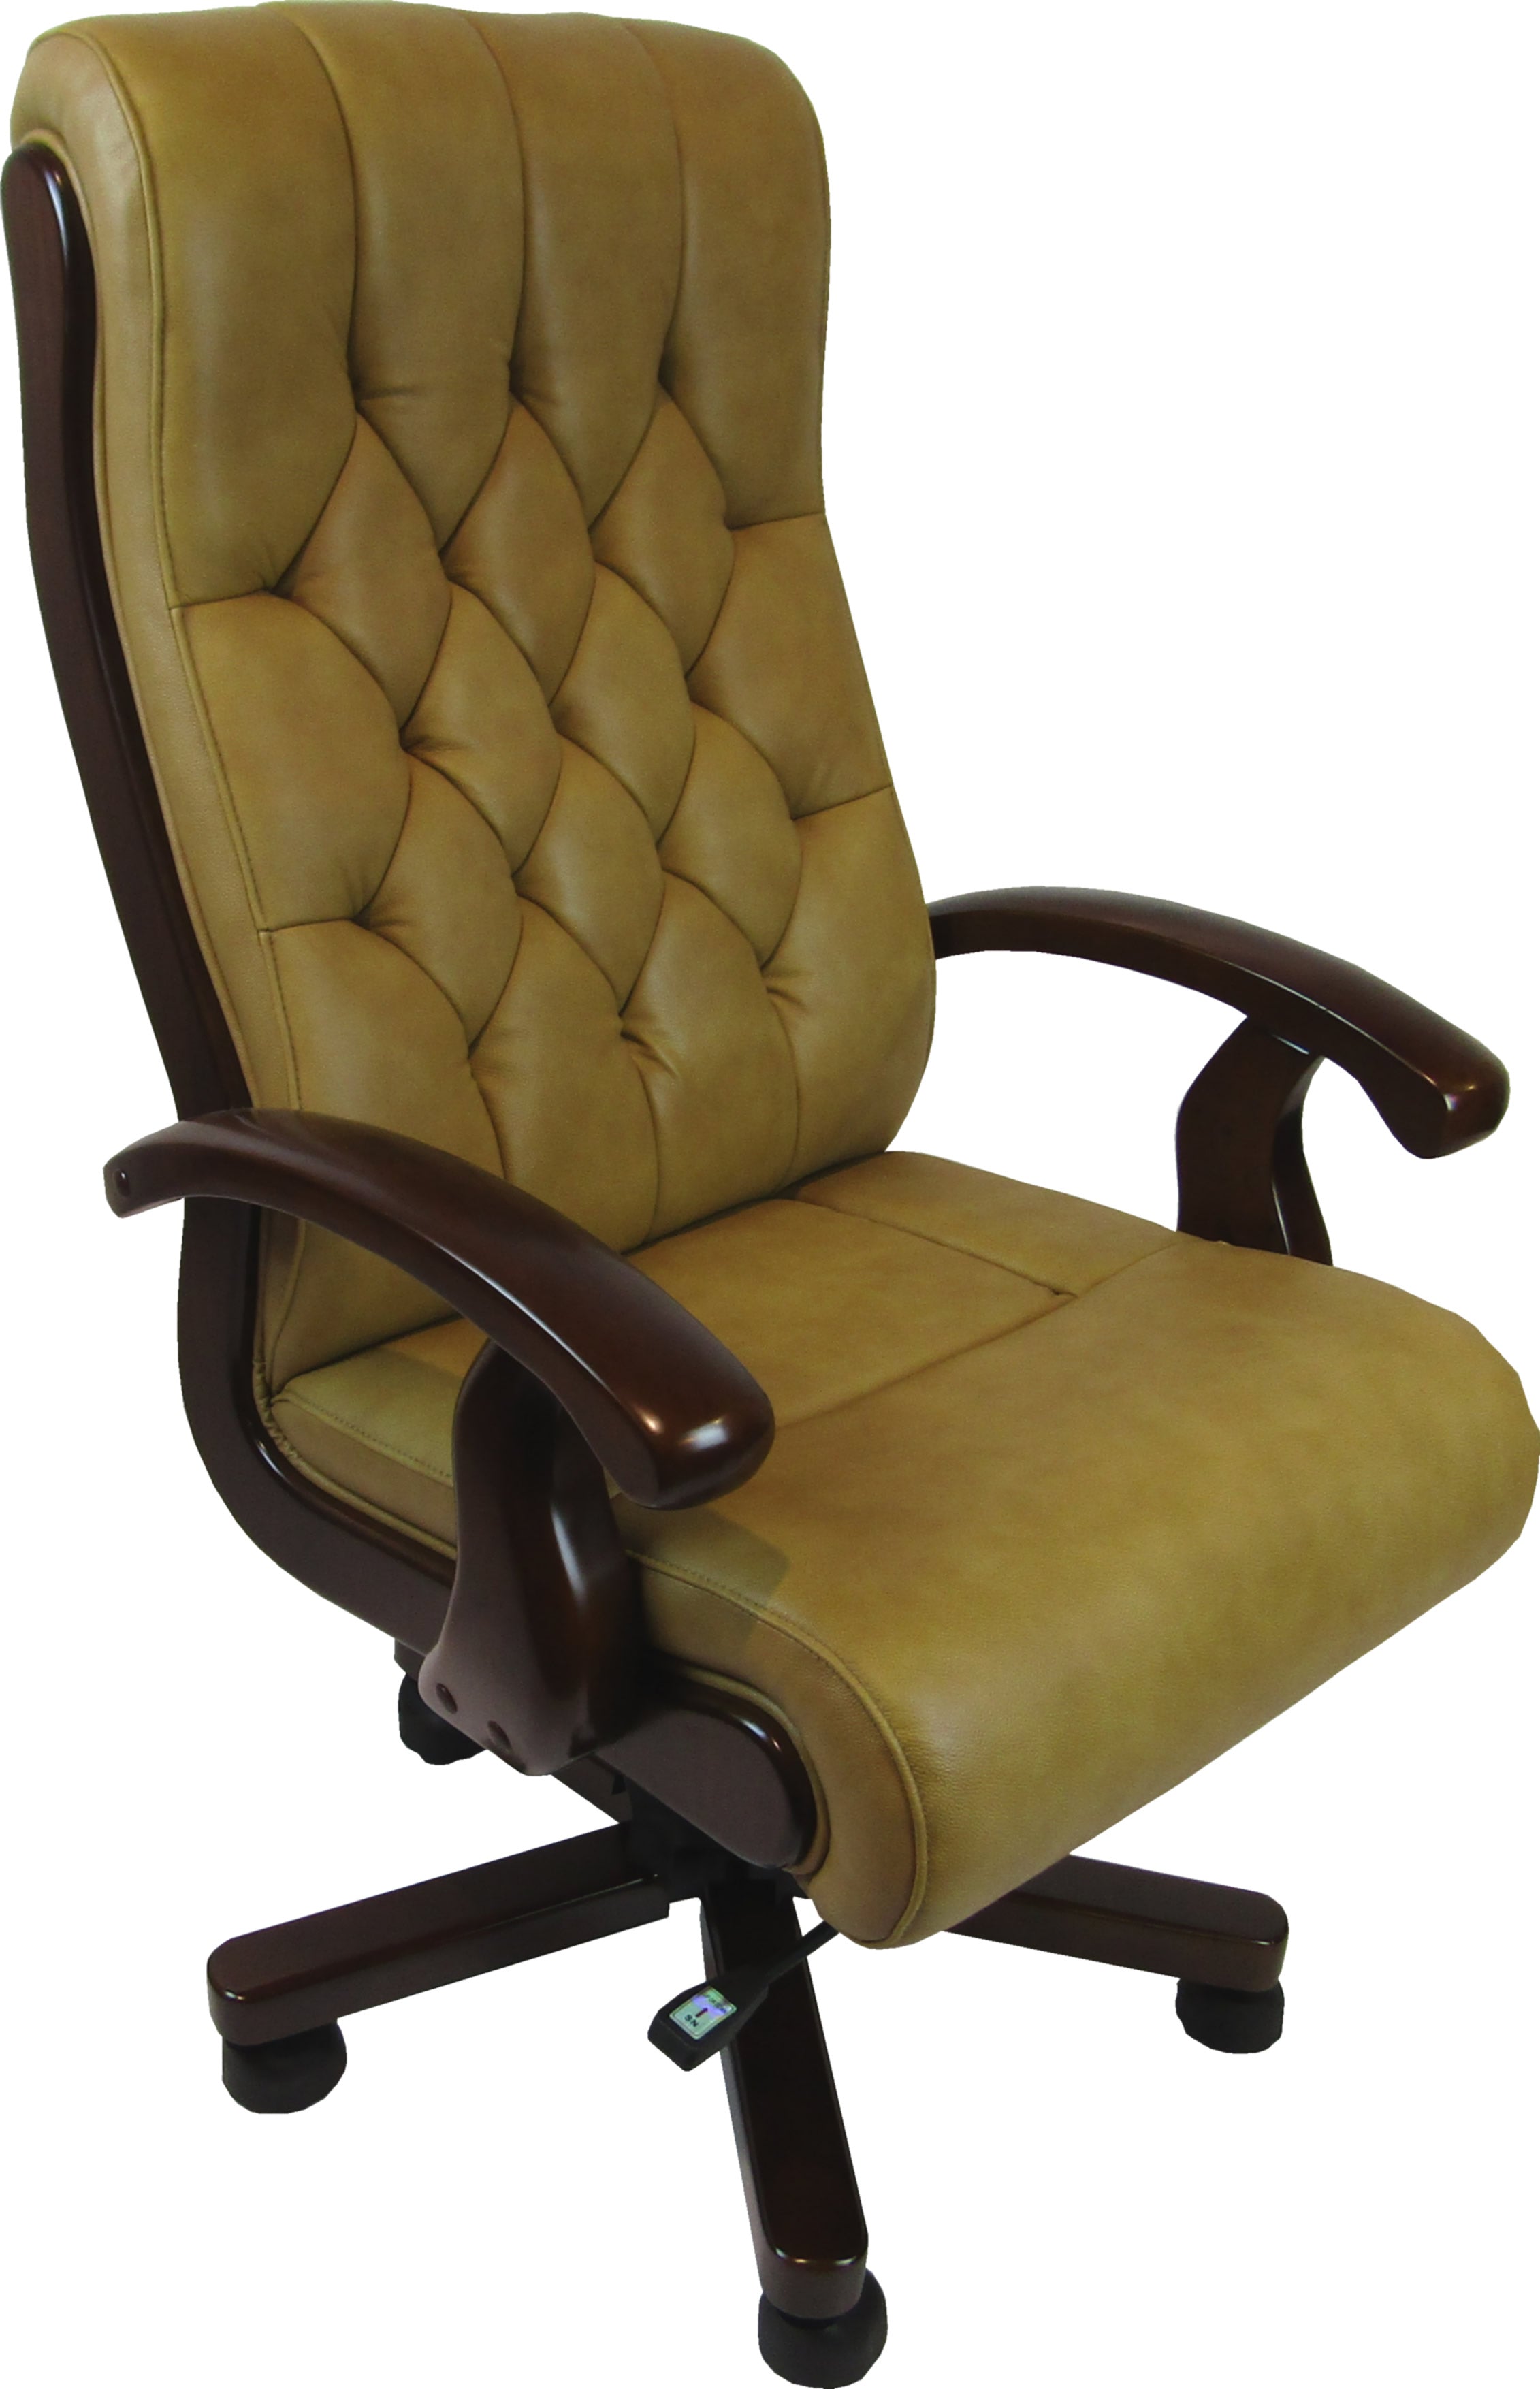 Beige Leather Chesterfield Executive Office Chair - CHA-WS-917 North Yorkshire